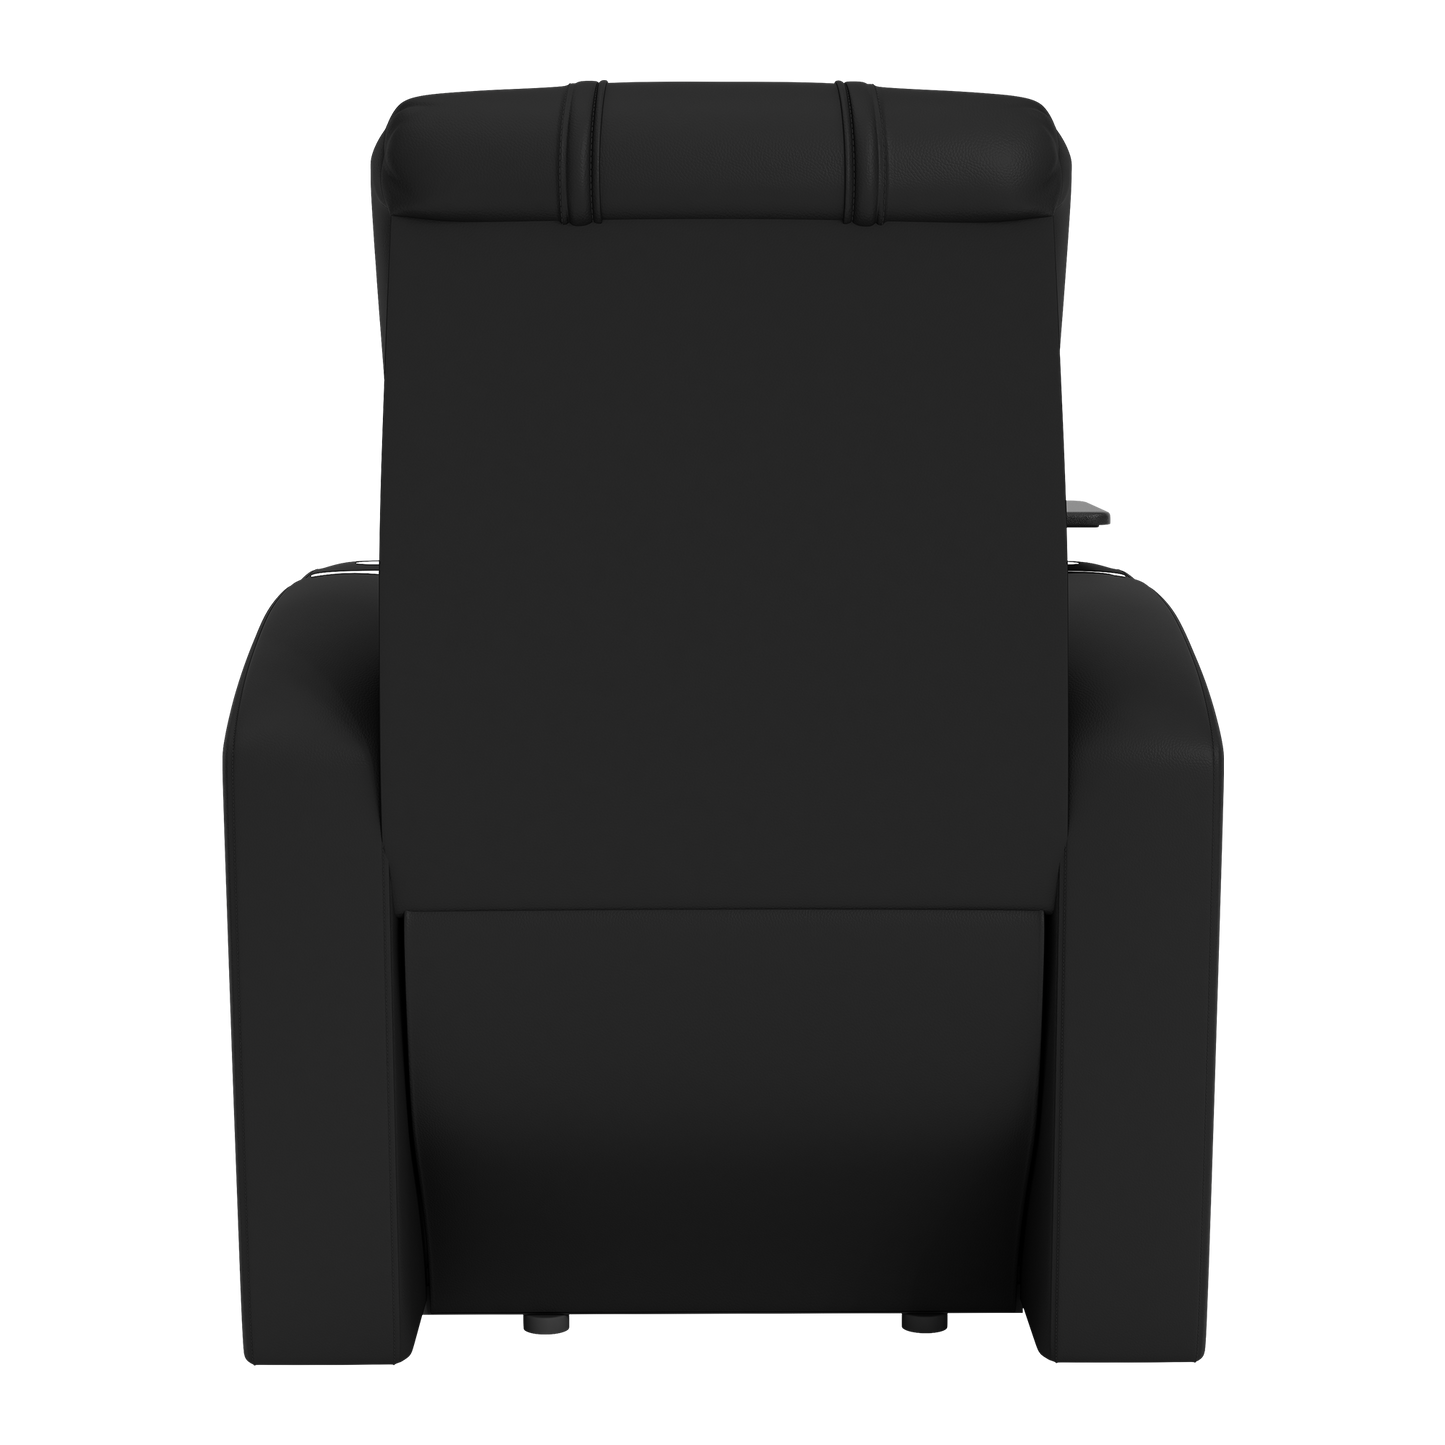 Stealth Power Plus Recliner with Indianapolis Colts Helmet Logo